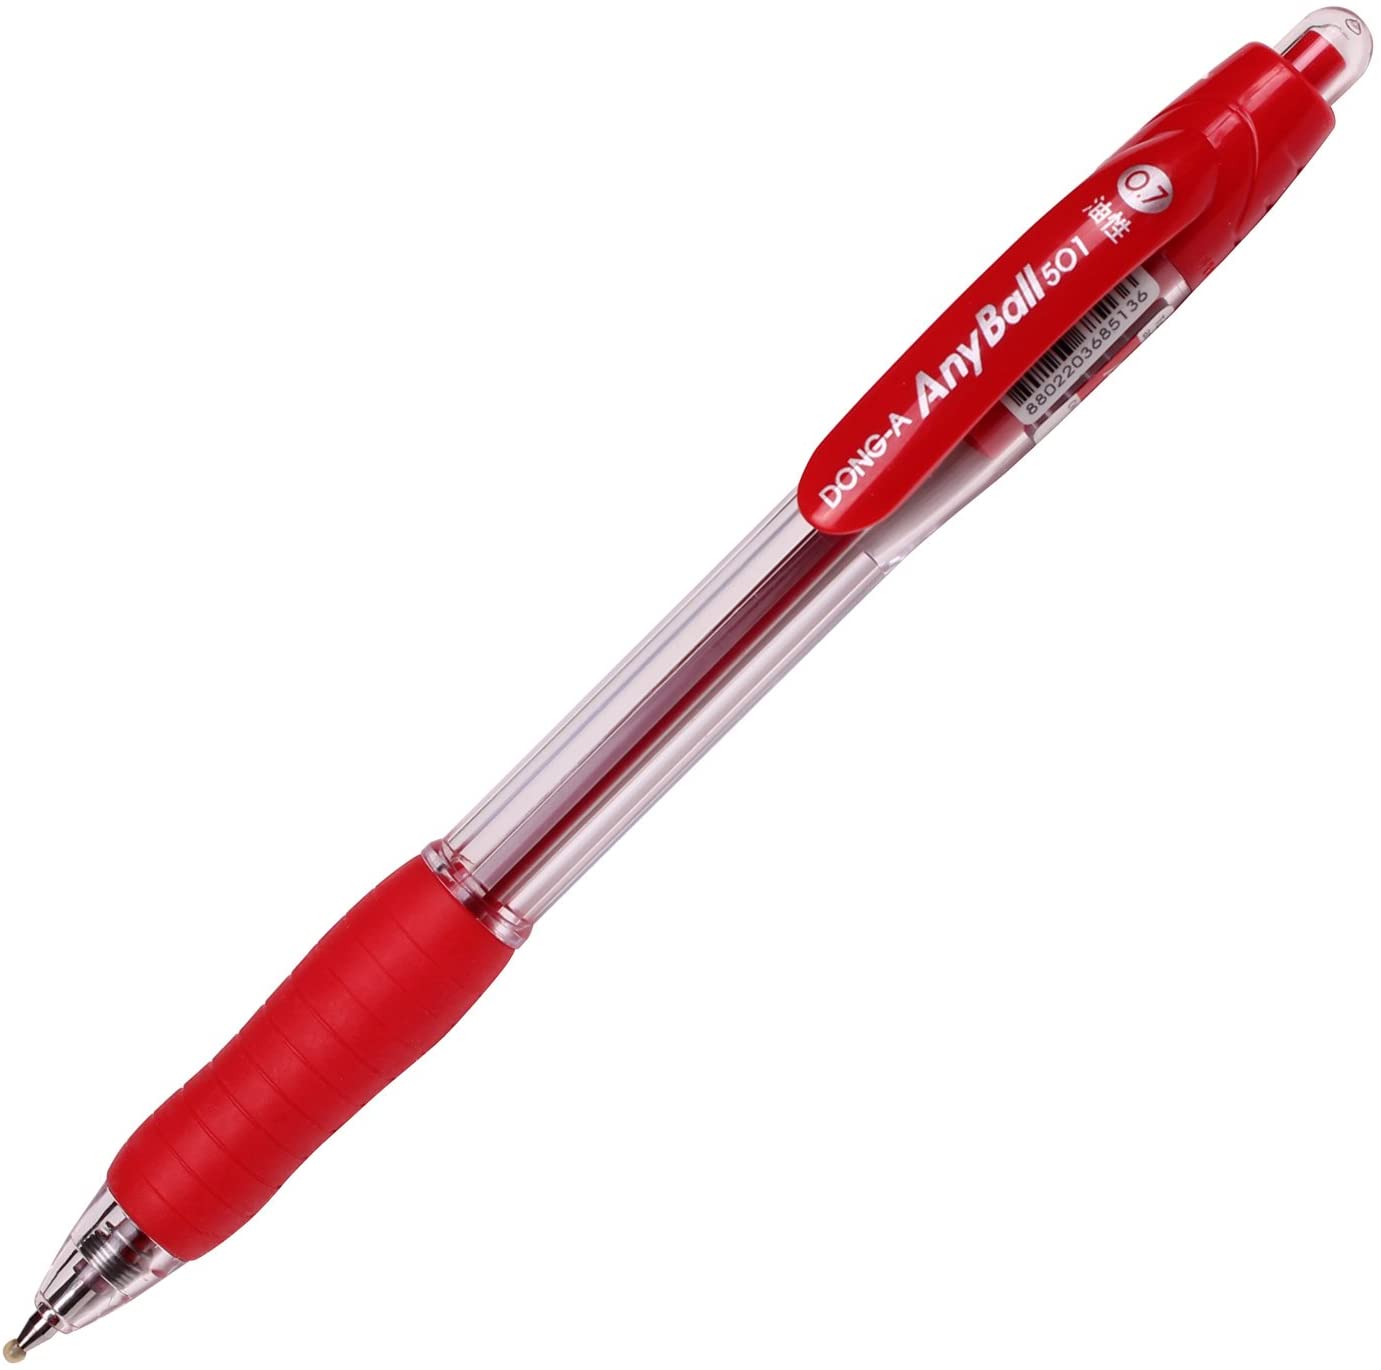 Dong A Anyball 501 0.7 mm Retractable Ballpoint Pens Red